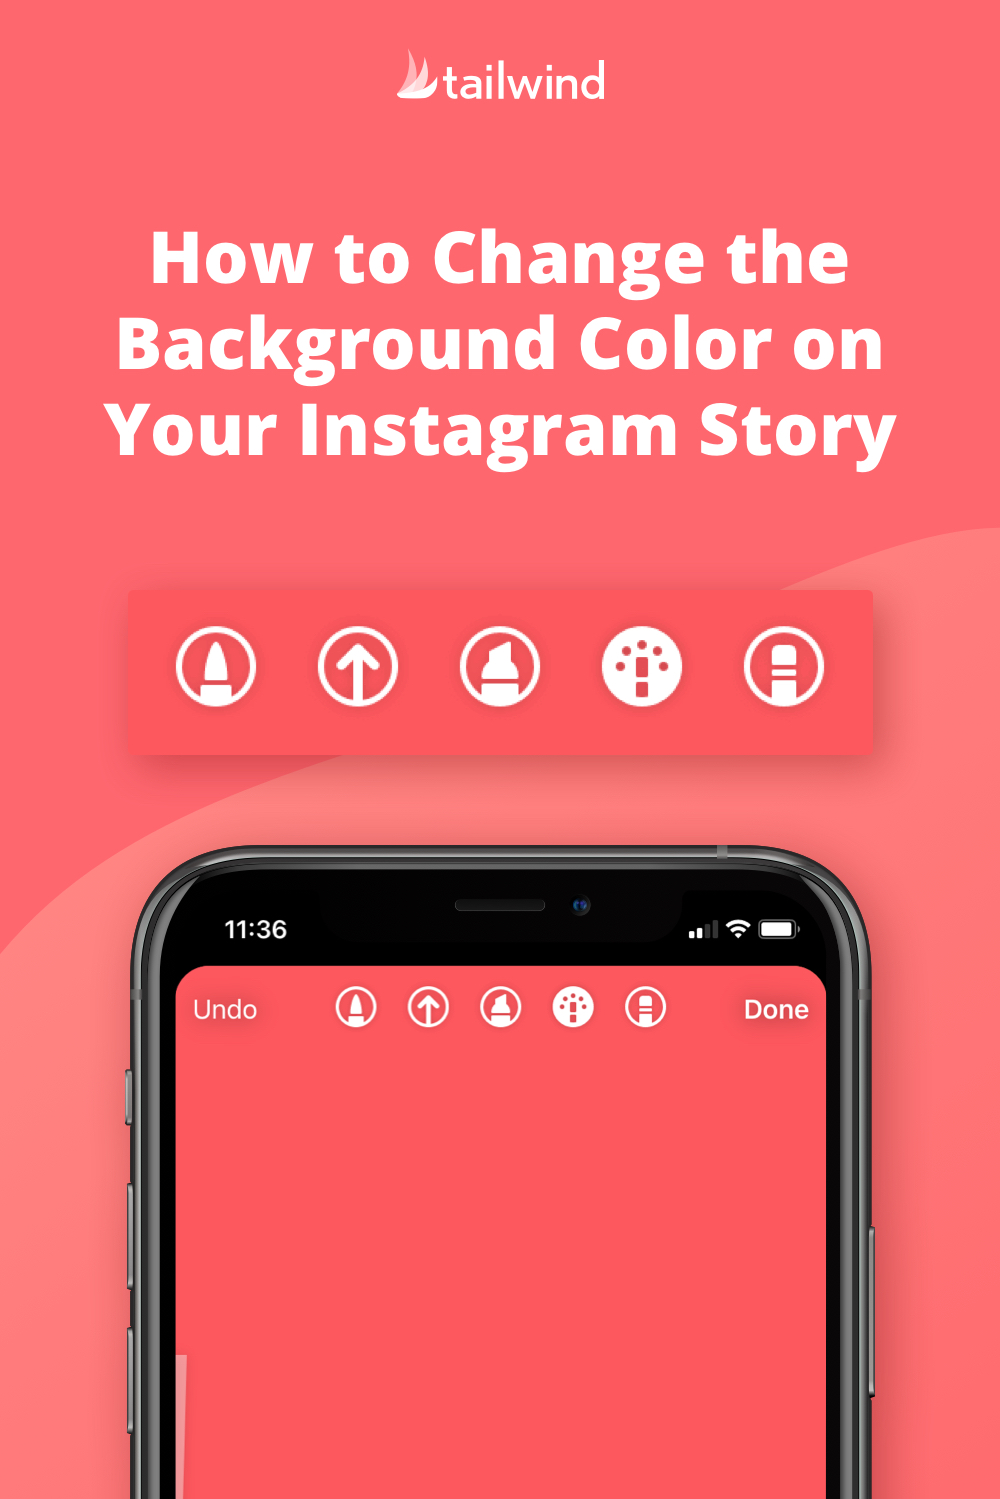 How to Change the Background Color on Your Instagram Story